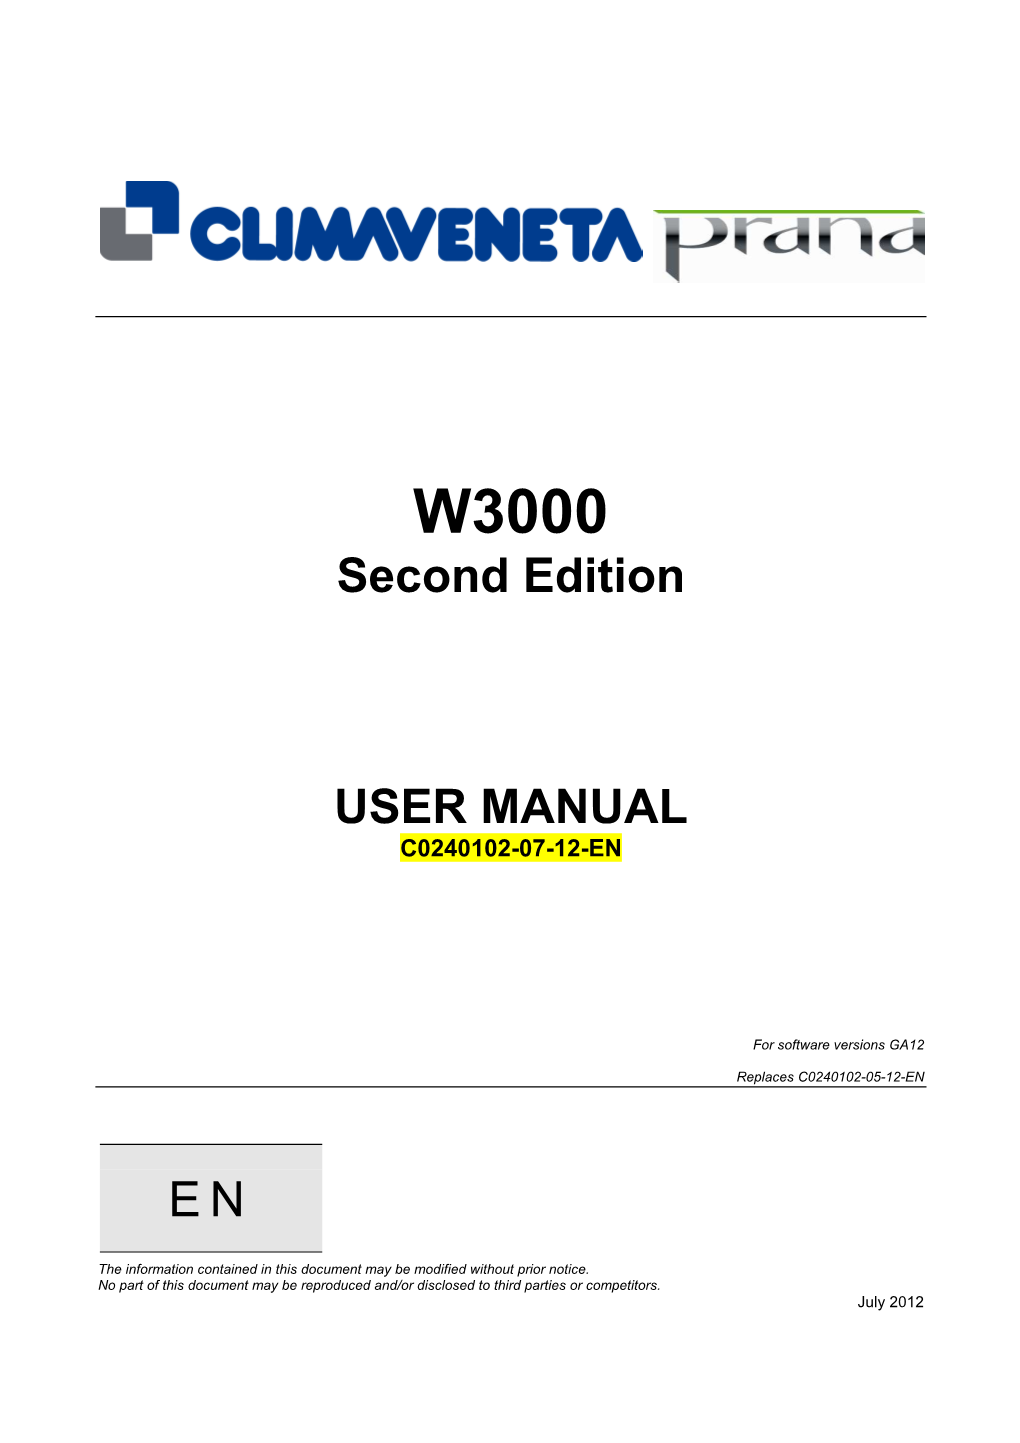 Second Edition USER MANUAL